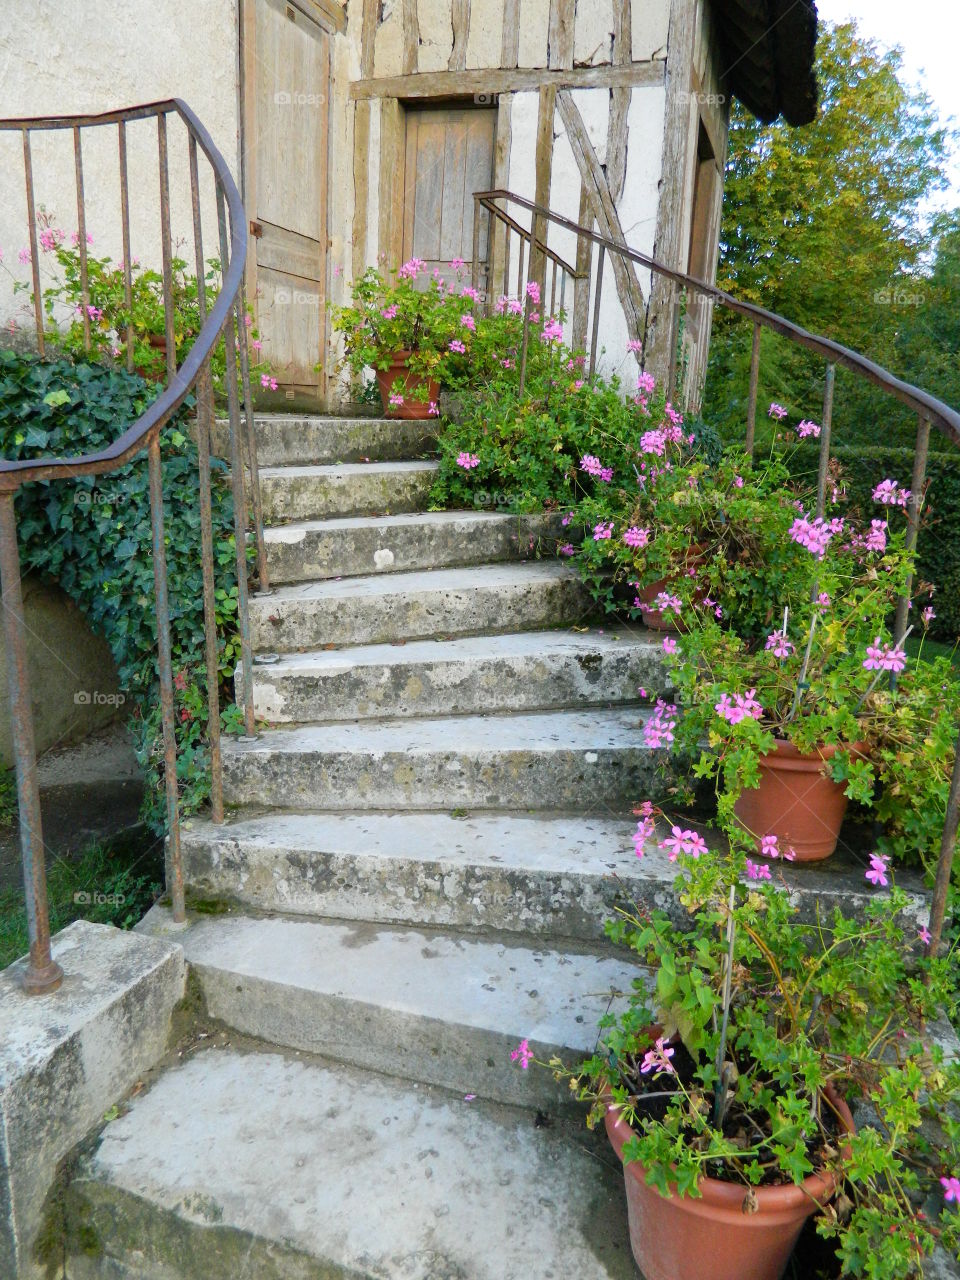 Flowers on the cottage steps. This is one of several cottages in the Marie Antoinette Village in Versailles, France.